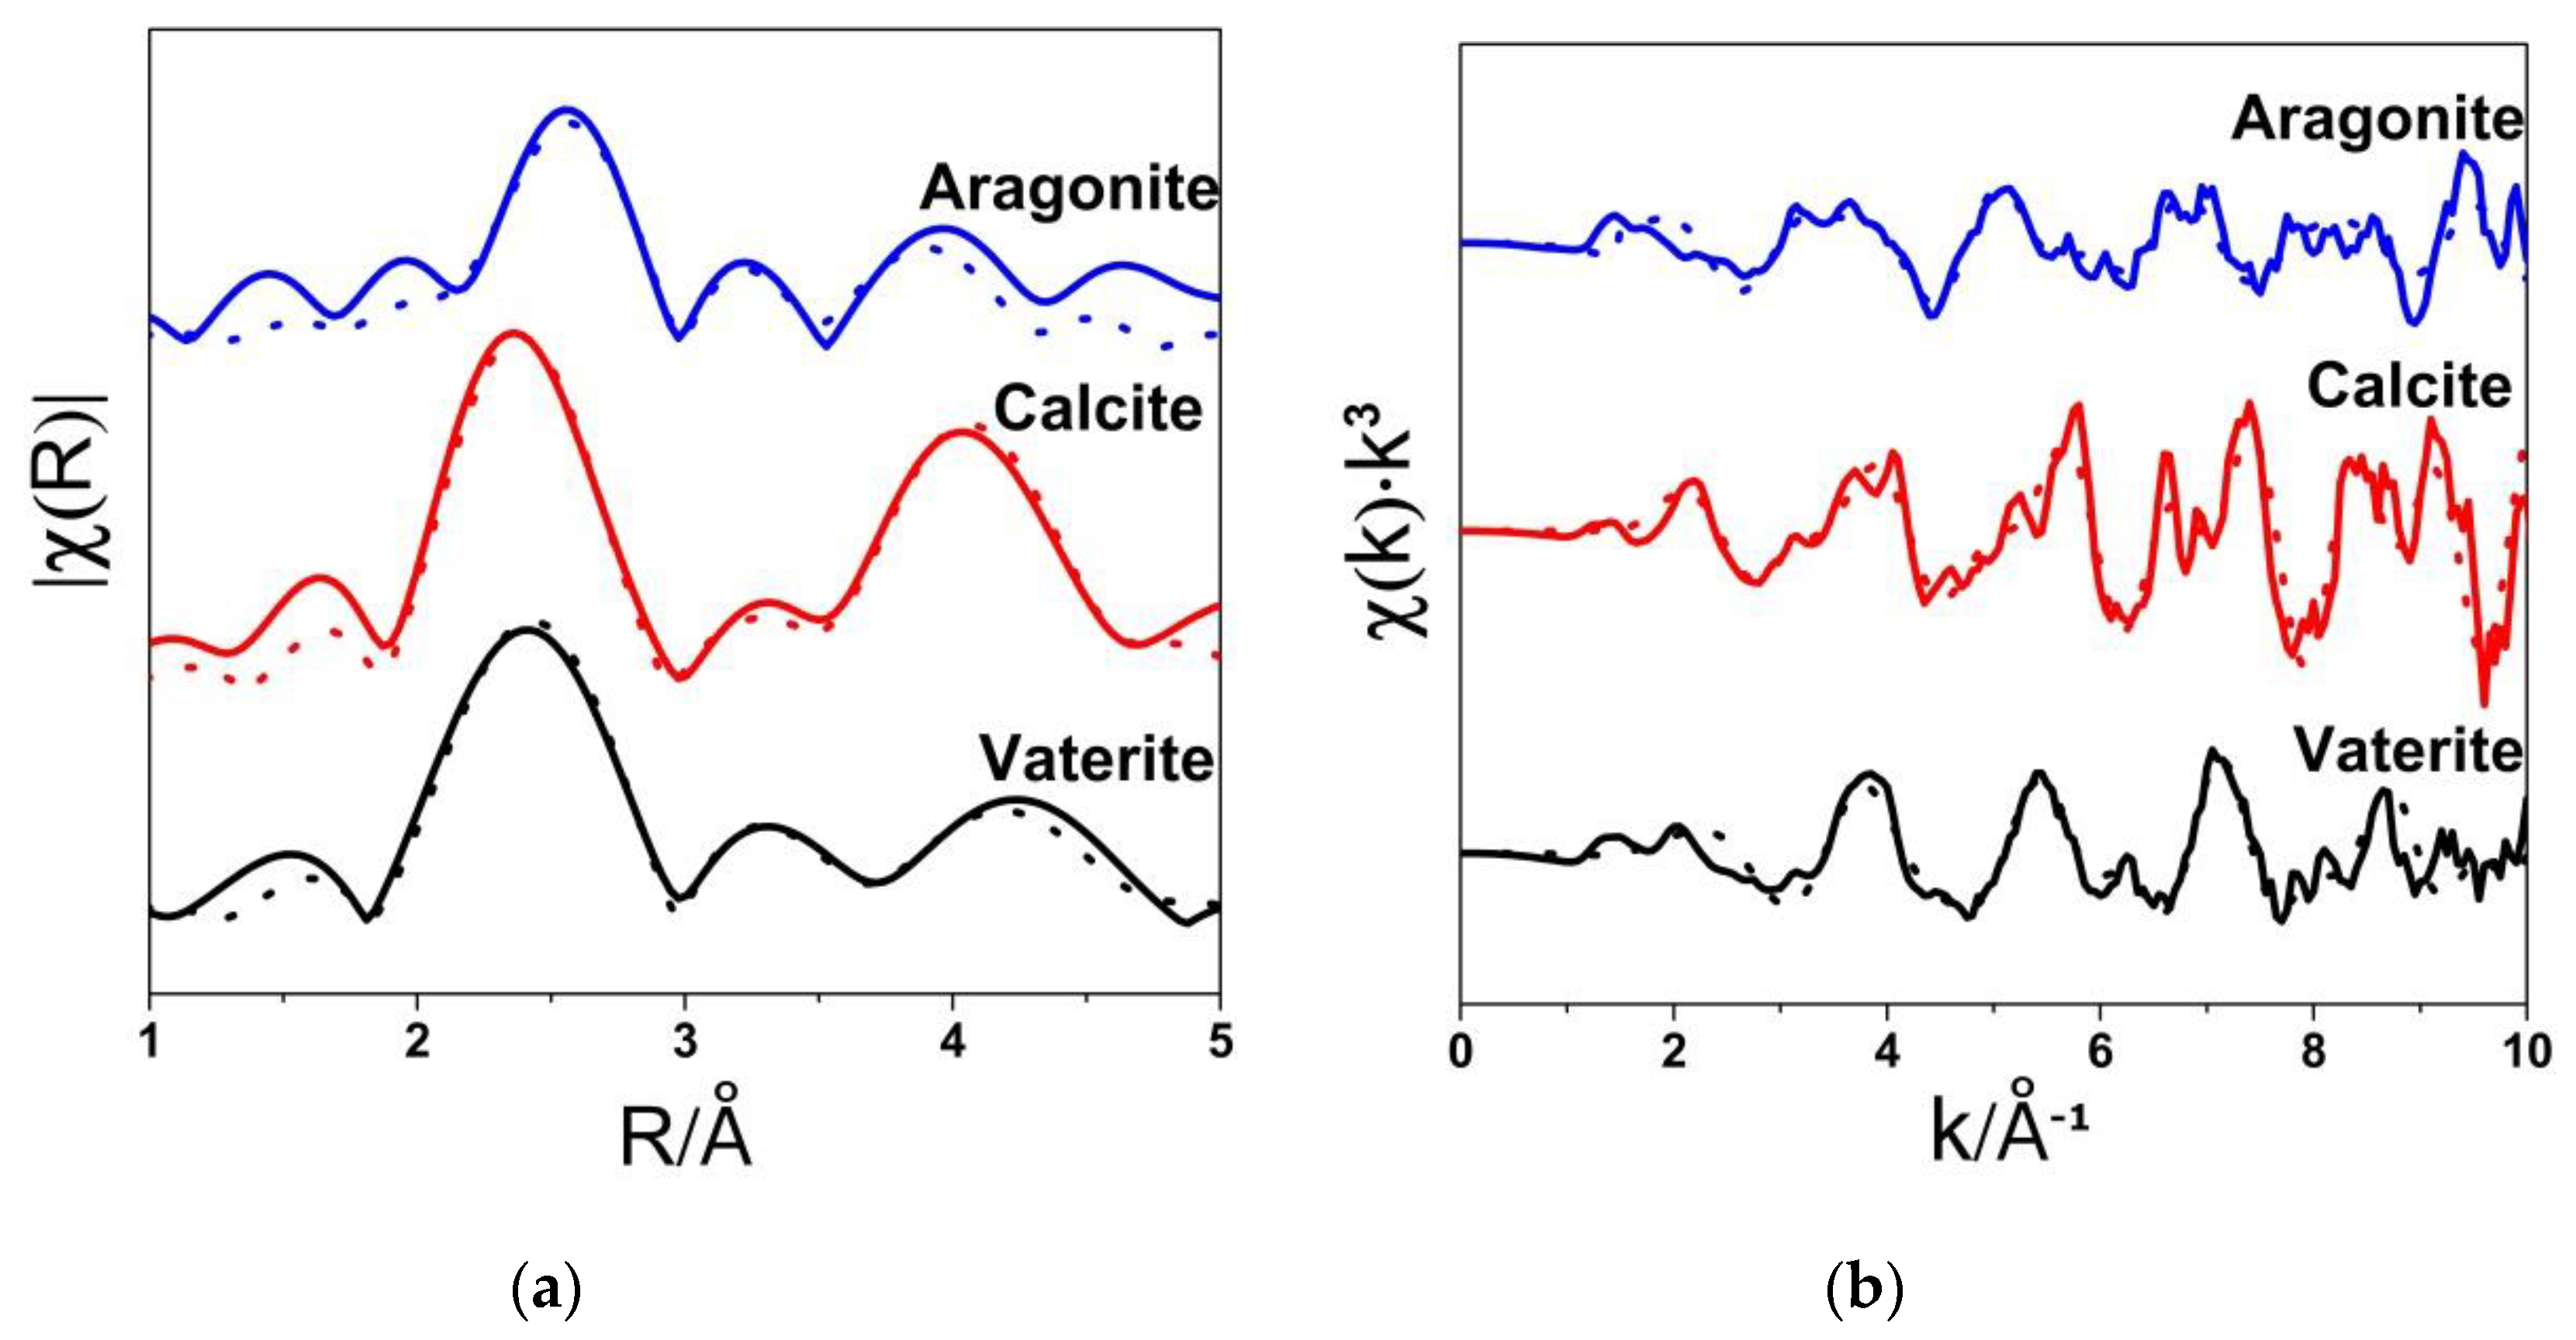 Crystals Free Full Text The Crystallization Process Of Vaterite Microdisc Mesocrystals Via Proto Vaterite Amorphous Calcium Carbonate Characterized By Cryo X Ray Absorption Spectroscopy Html